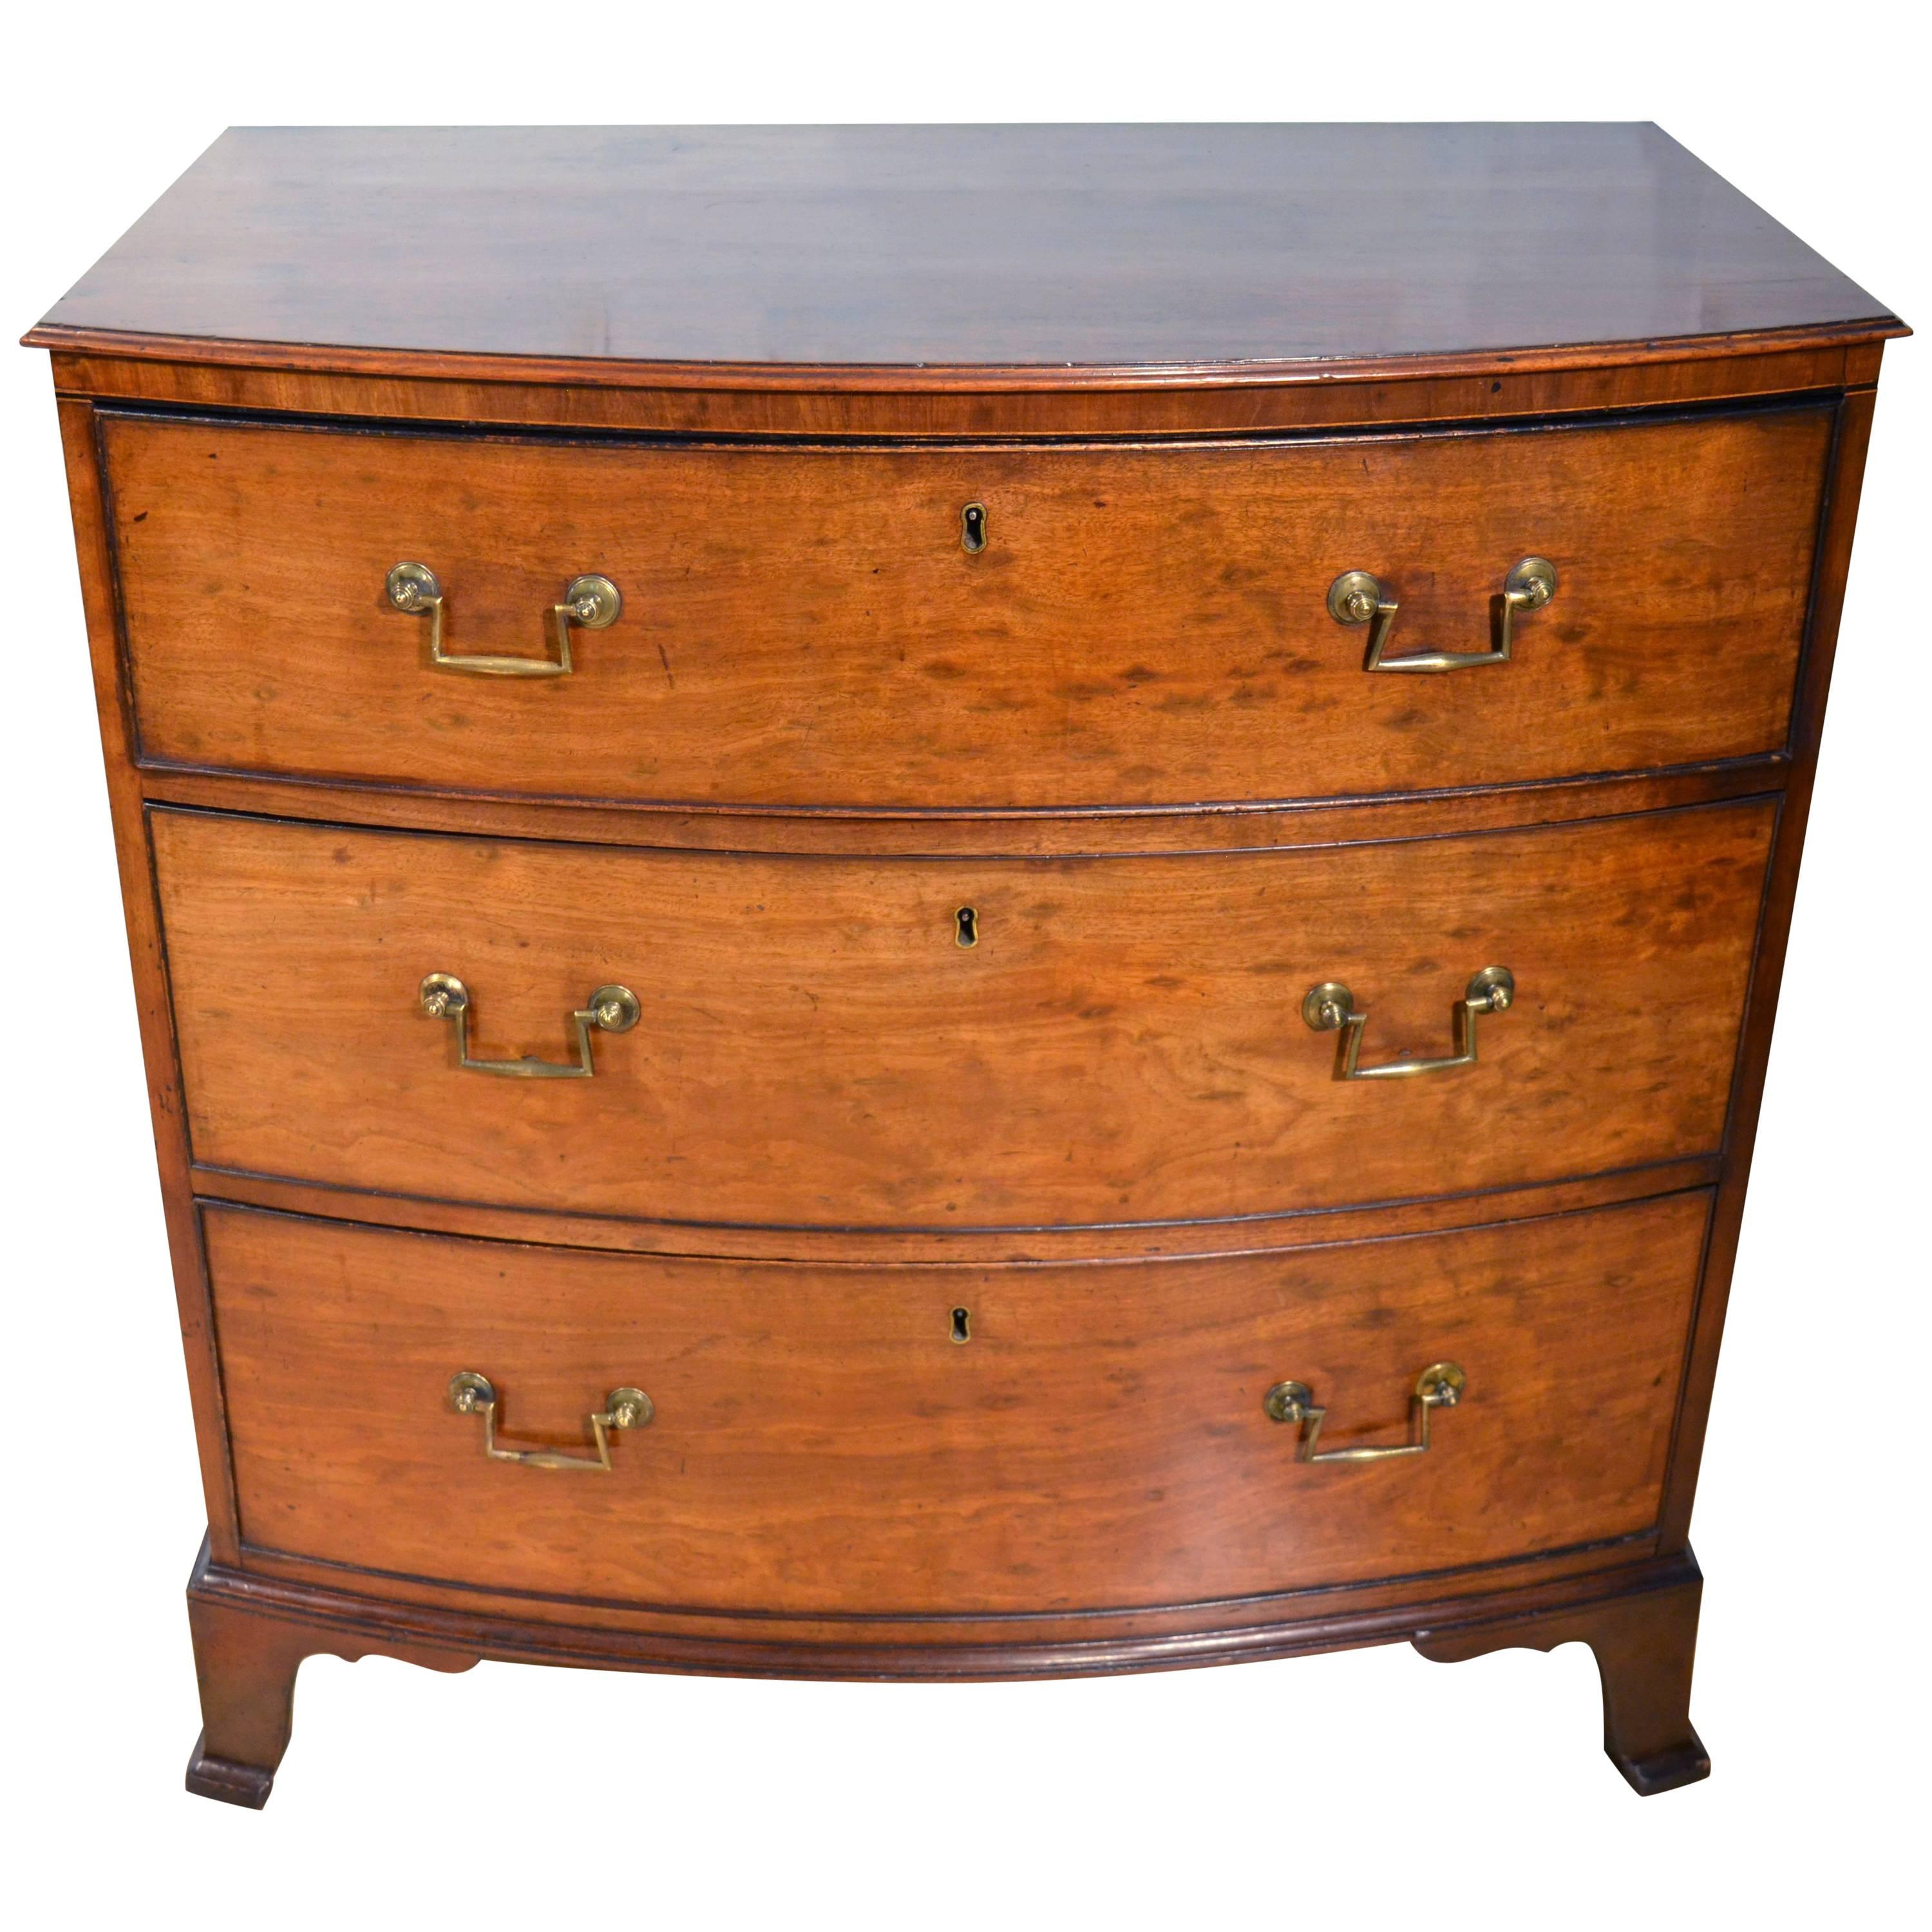 English Regency Bow Fronted Chest of Drawers